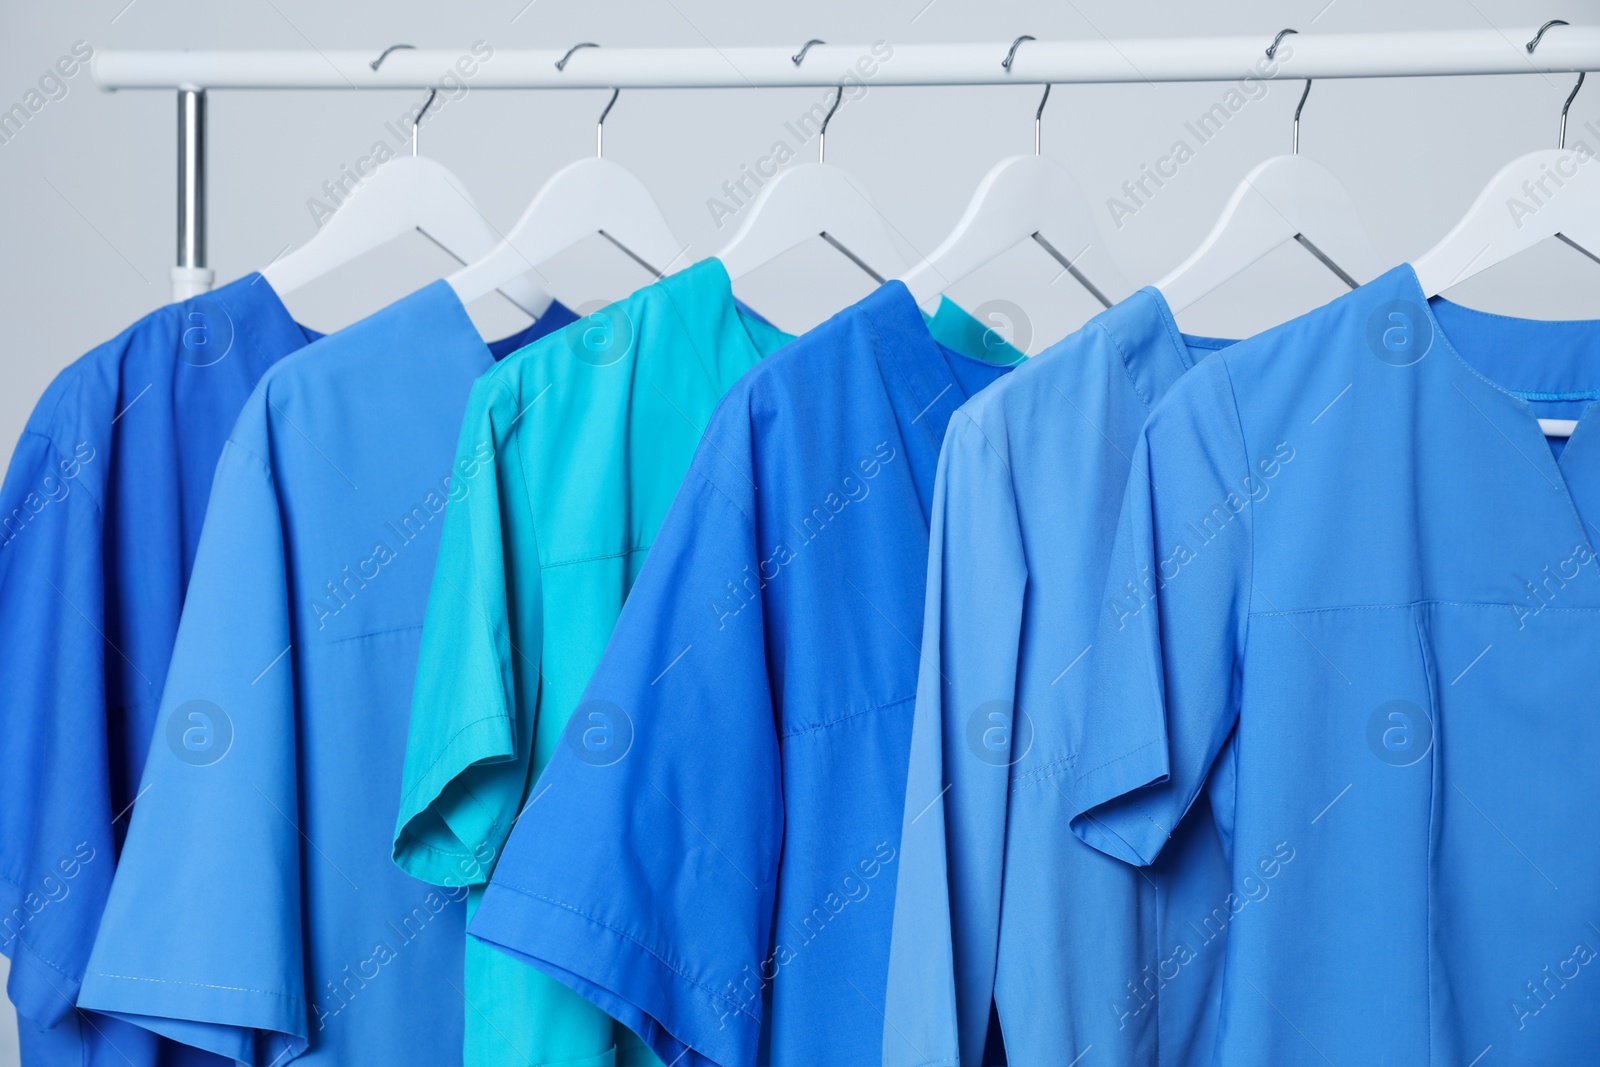 Photo of Different medical uniforms on rack against light grey background